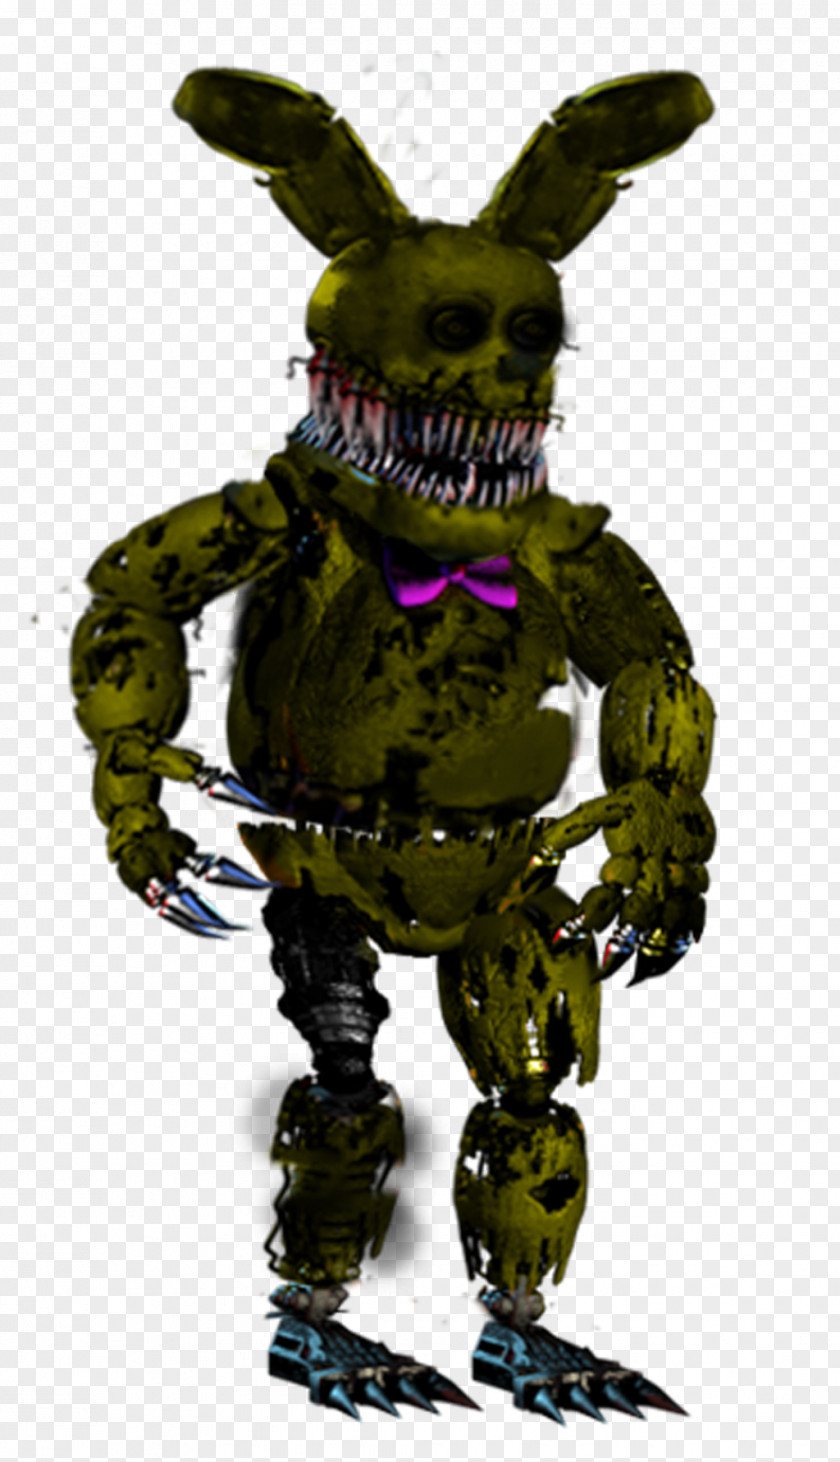 Sprin Five Nights At Freddy's 3 Freddy's: Sister Location The Joy Of Creation: Reborn 4 2 PNG